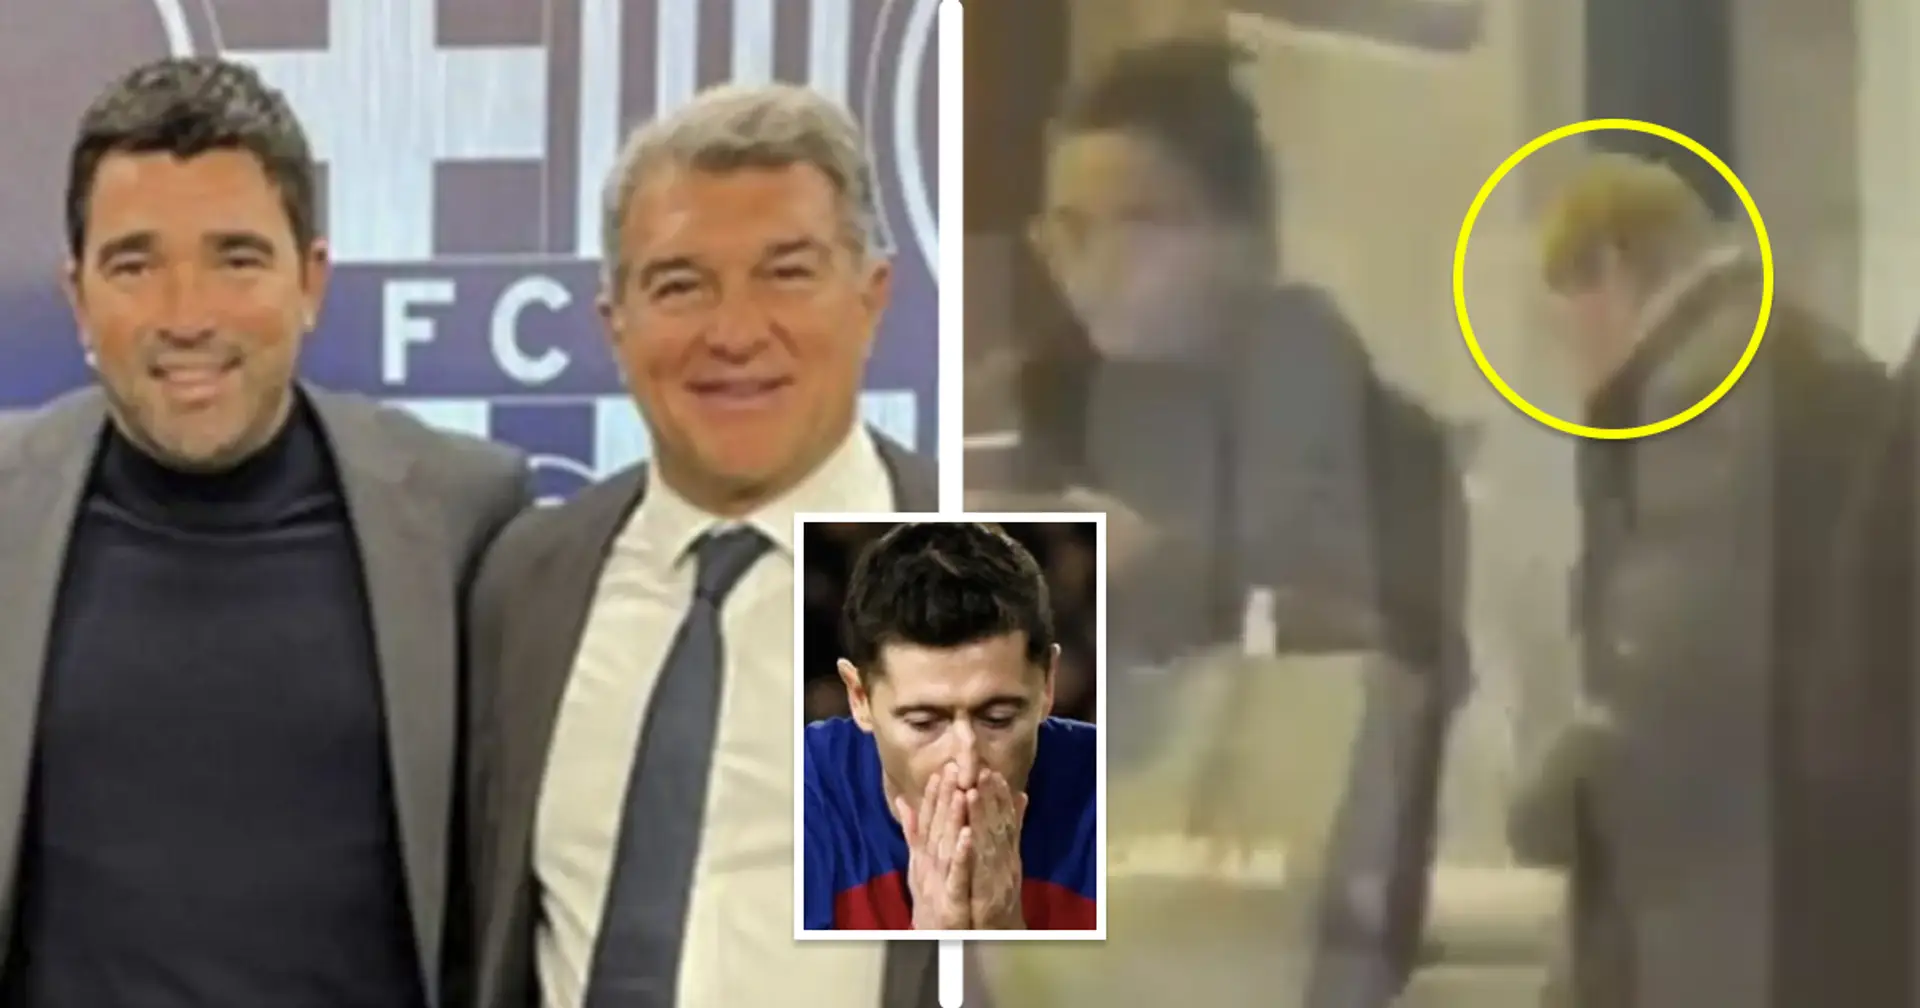 Super agent meets Laporta and Deco: 3 players they could discuss